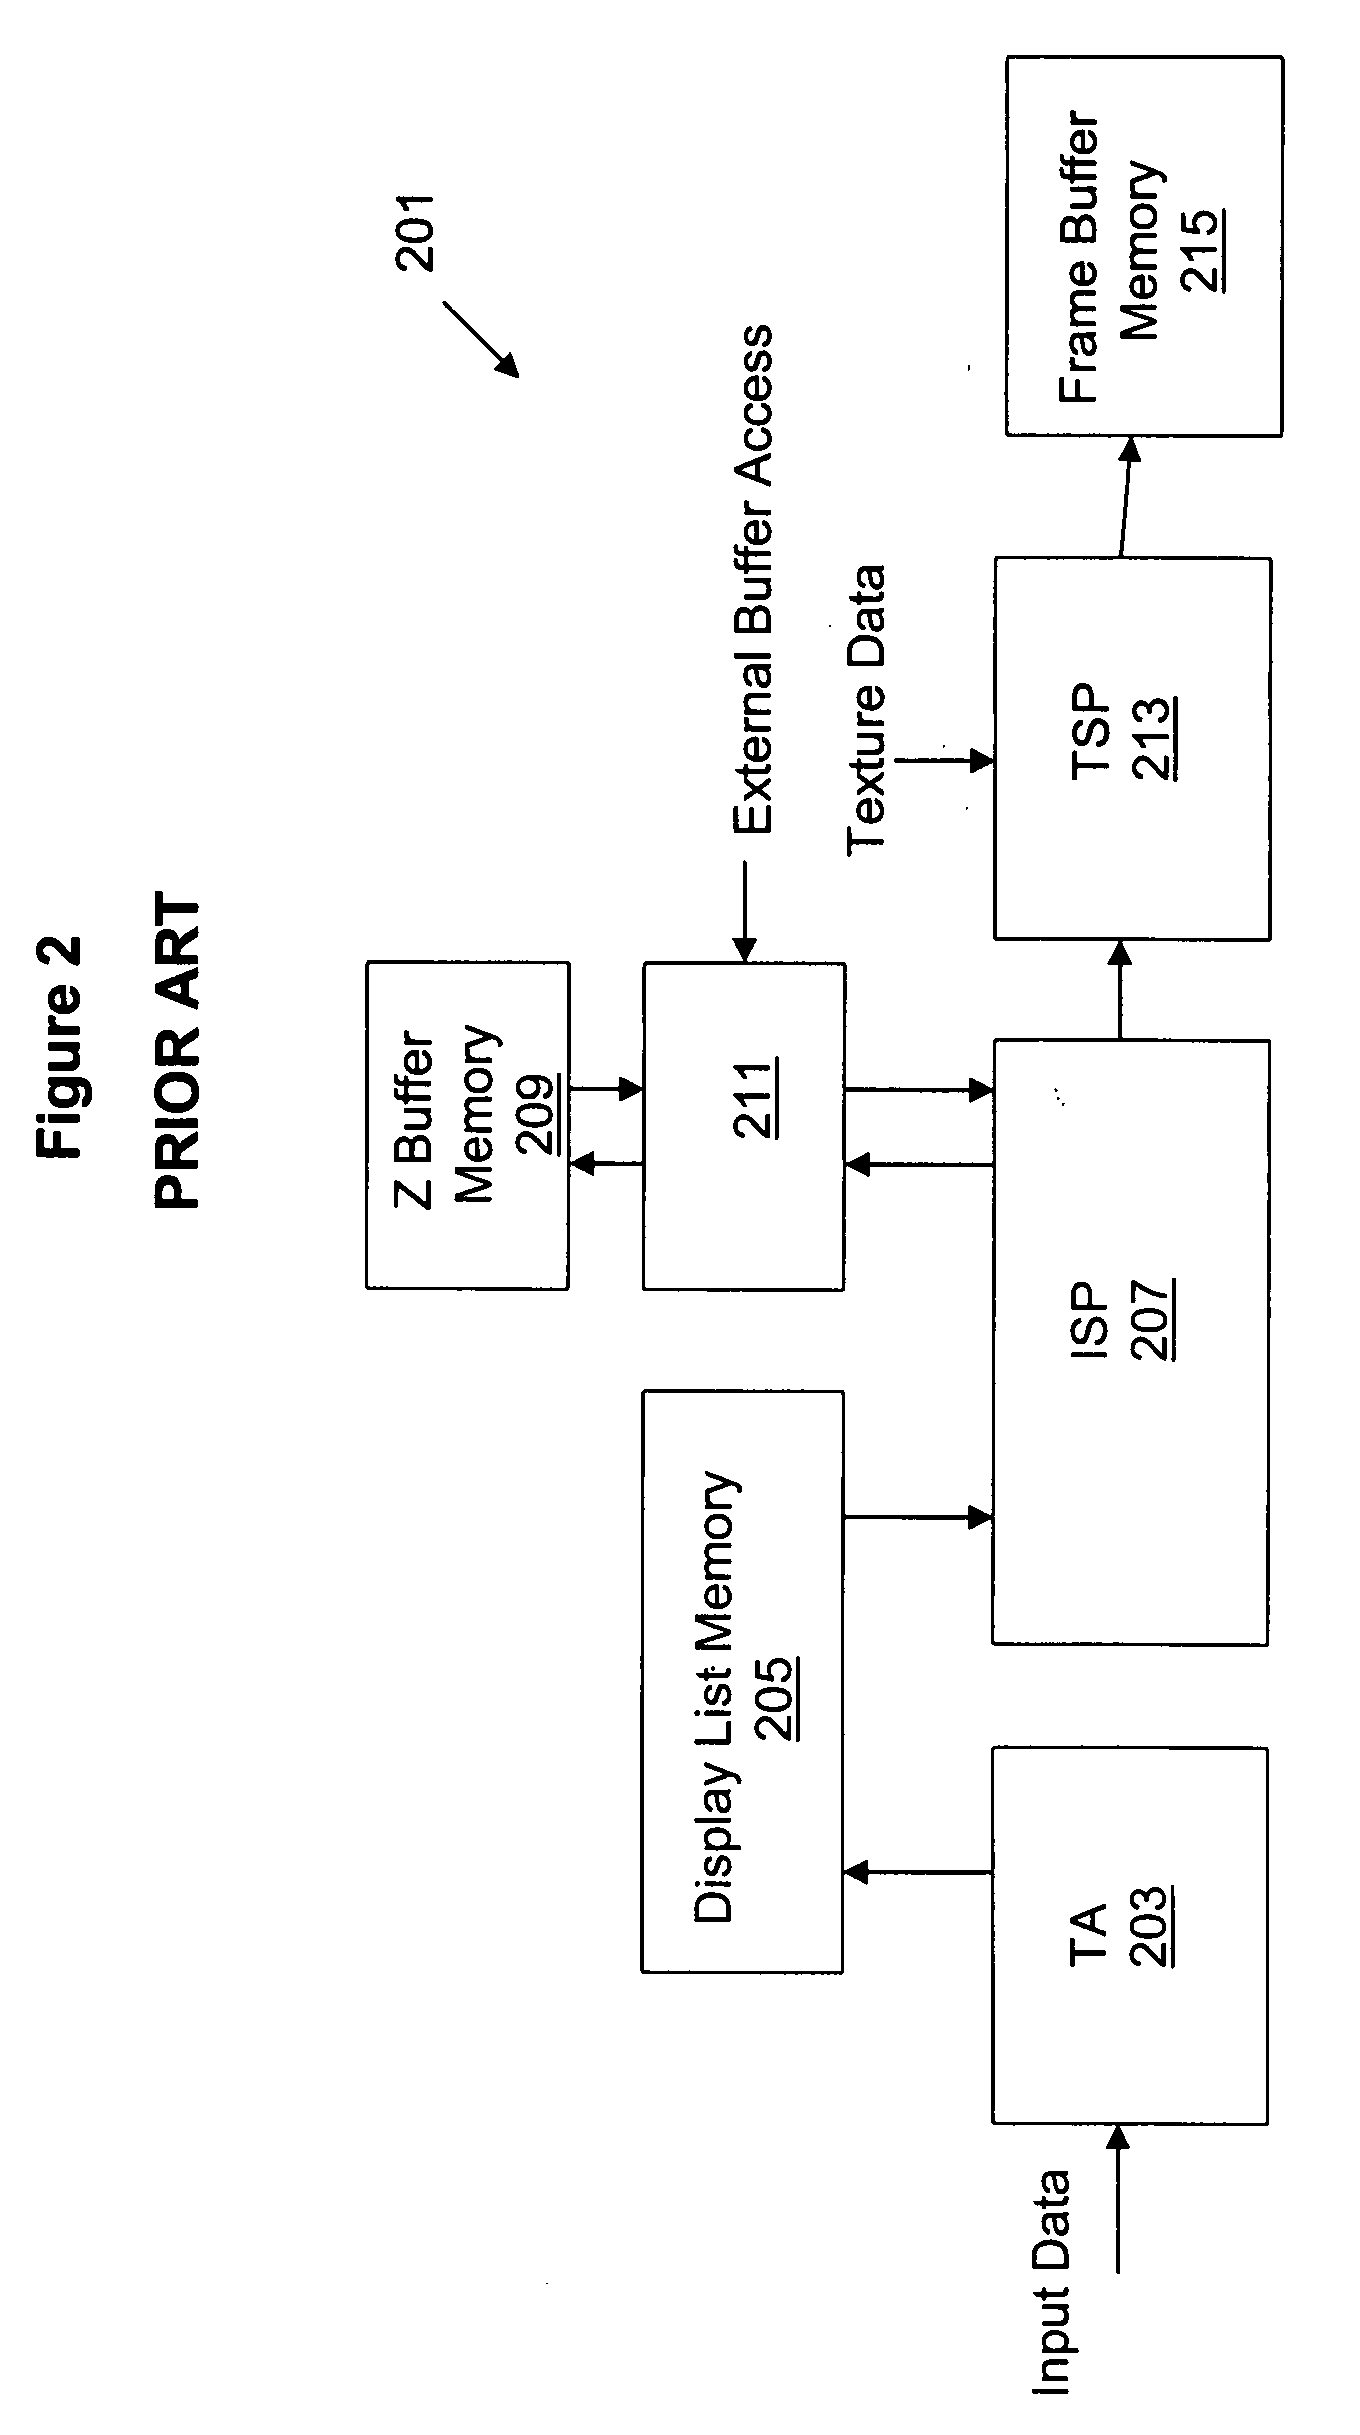 Methods and systems for generating 3-dimensional computer images